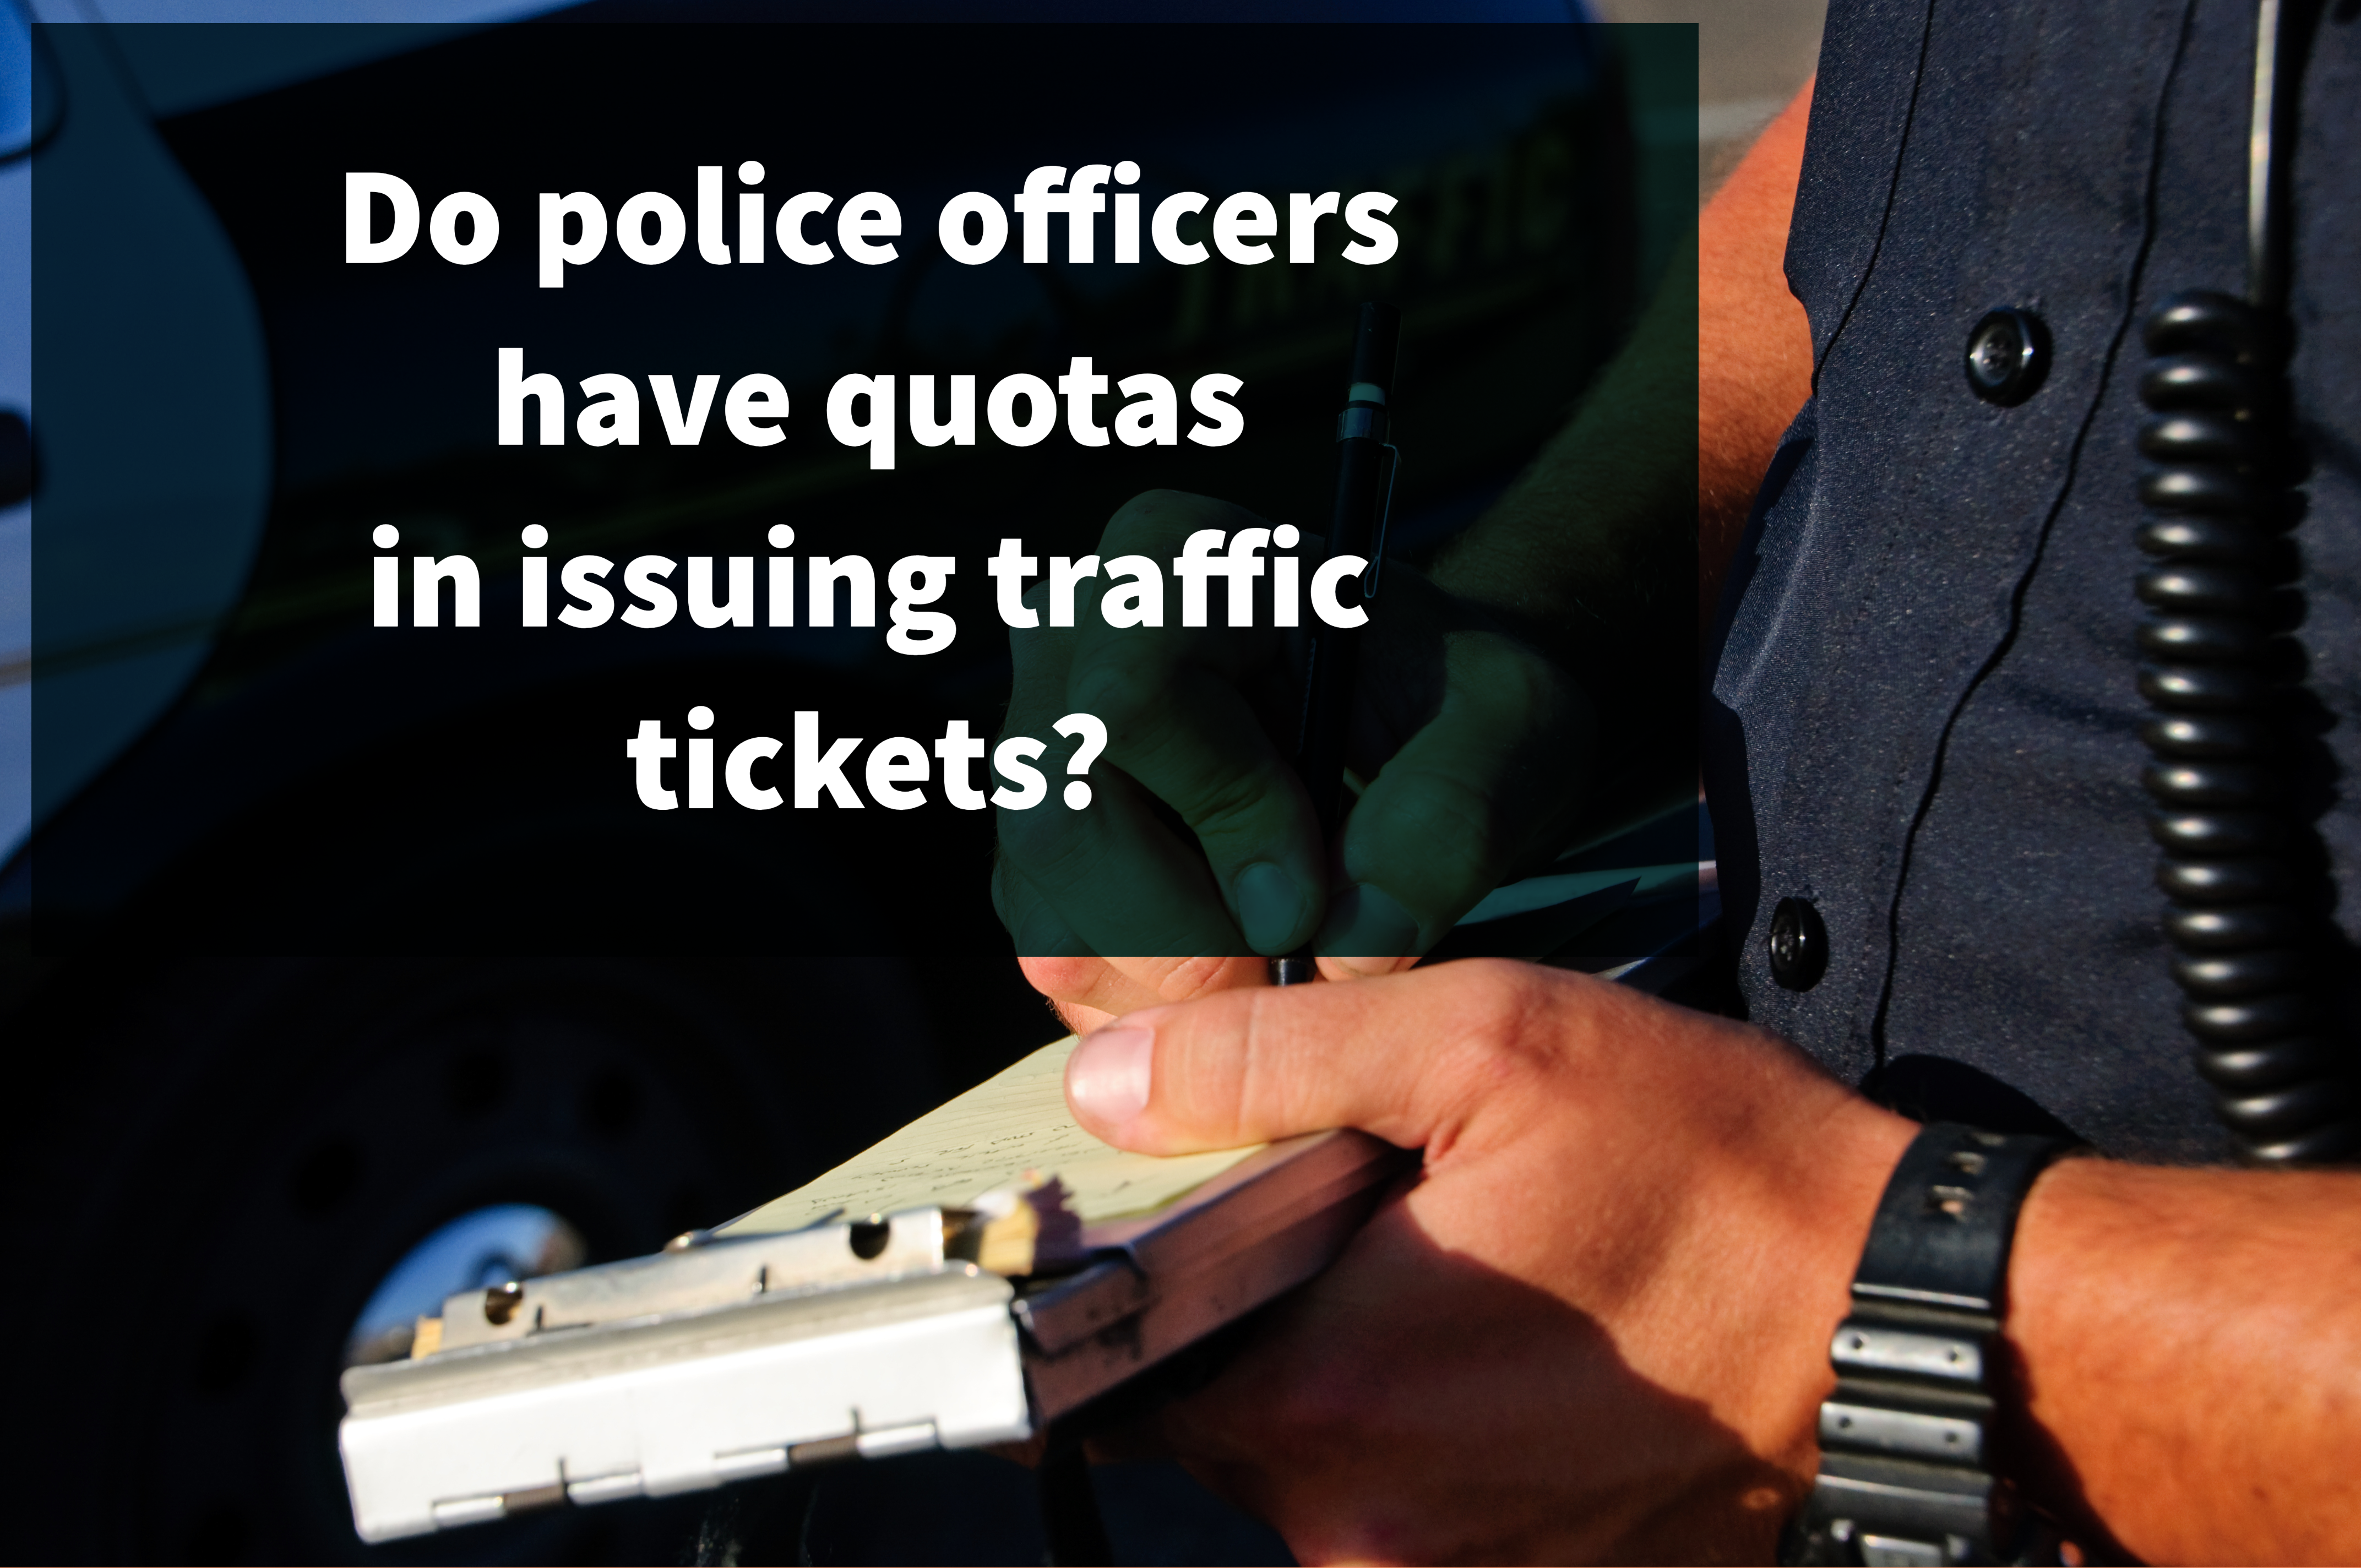 do police officers have quotas